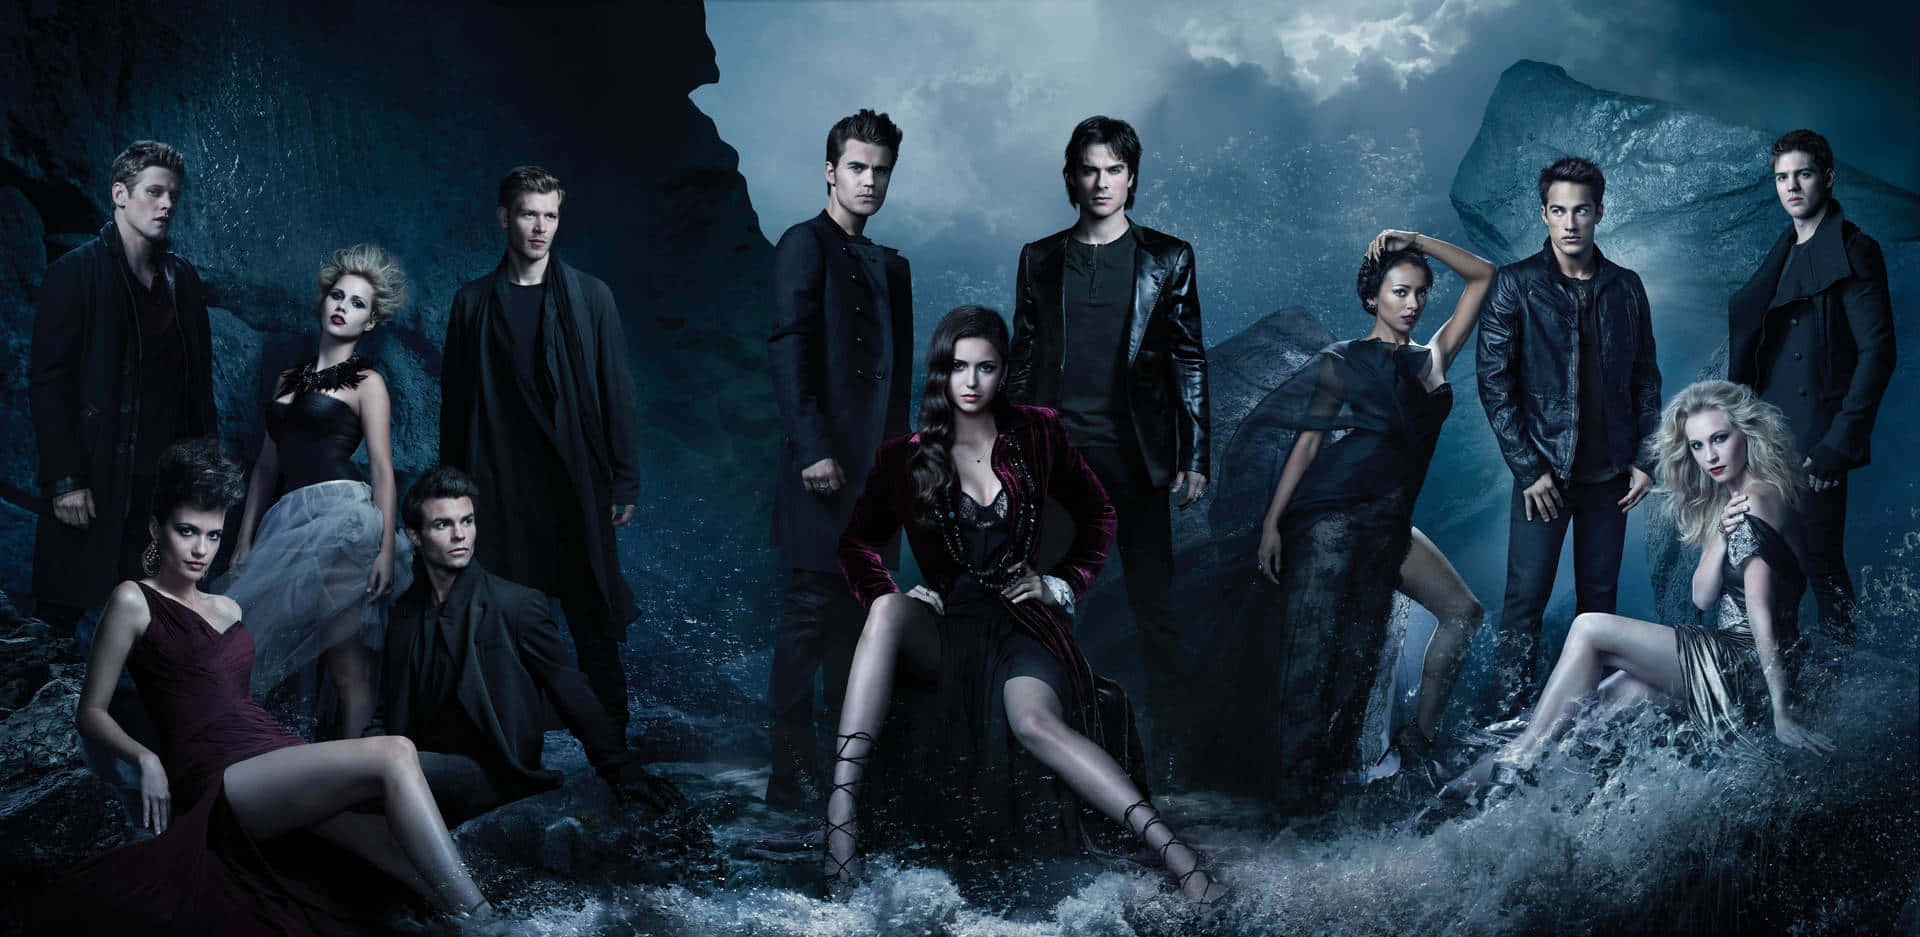 Get Ready for Adventure with The Vampire Diaries Iphone Wallpaper